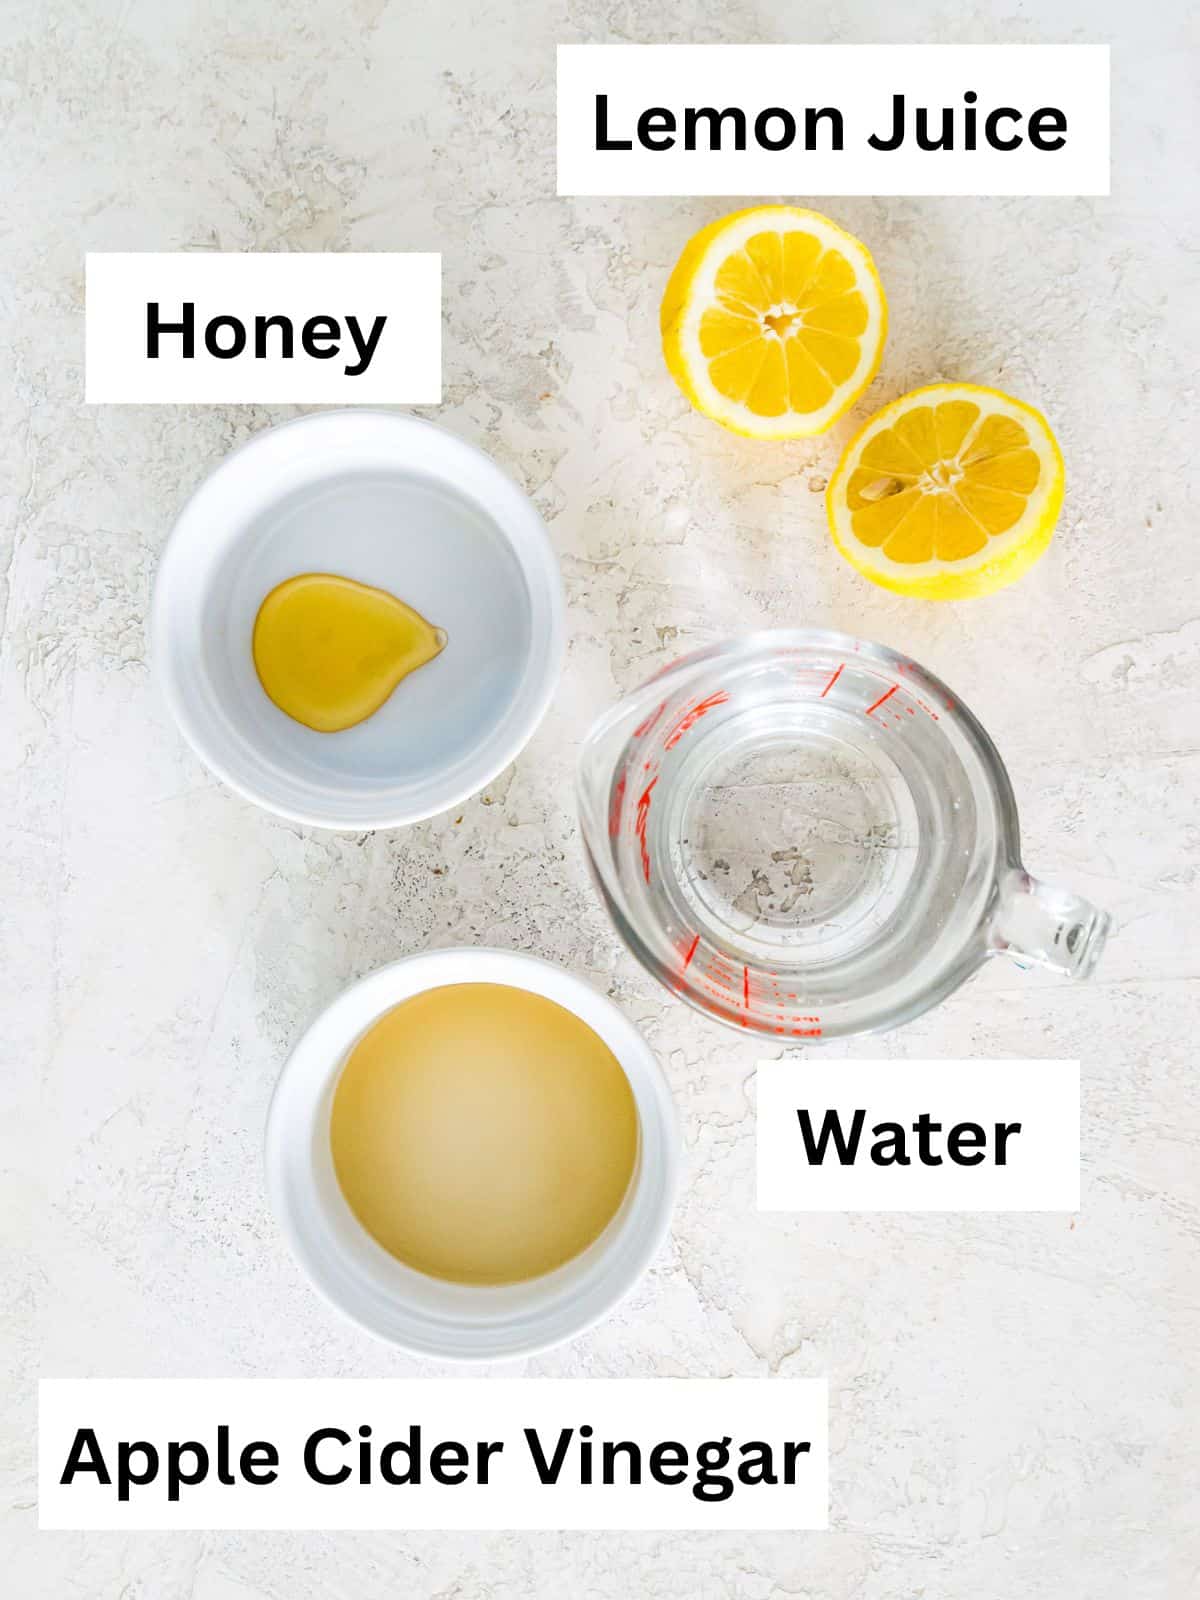 The ingredients needed to make an apple cider vinegar and lemon juice drink separated into small bowls. 